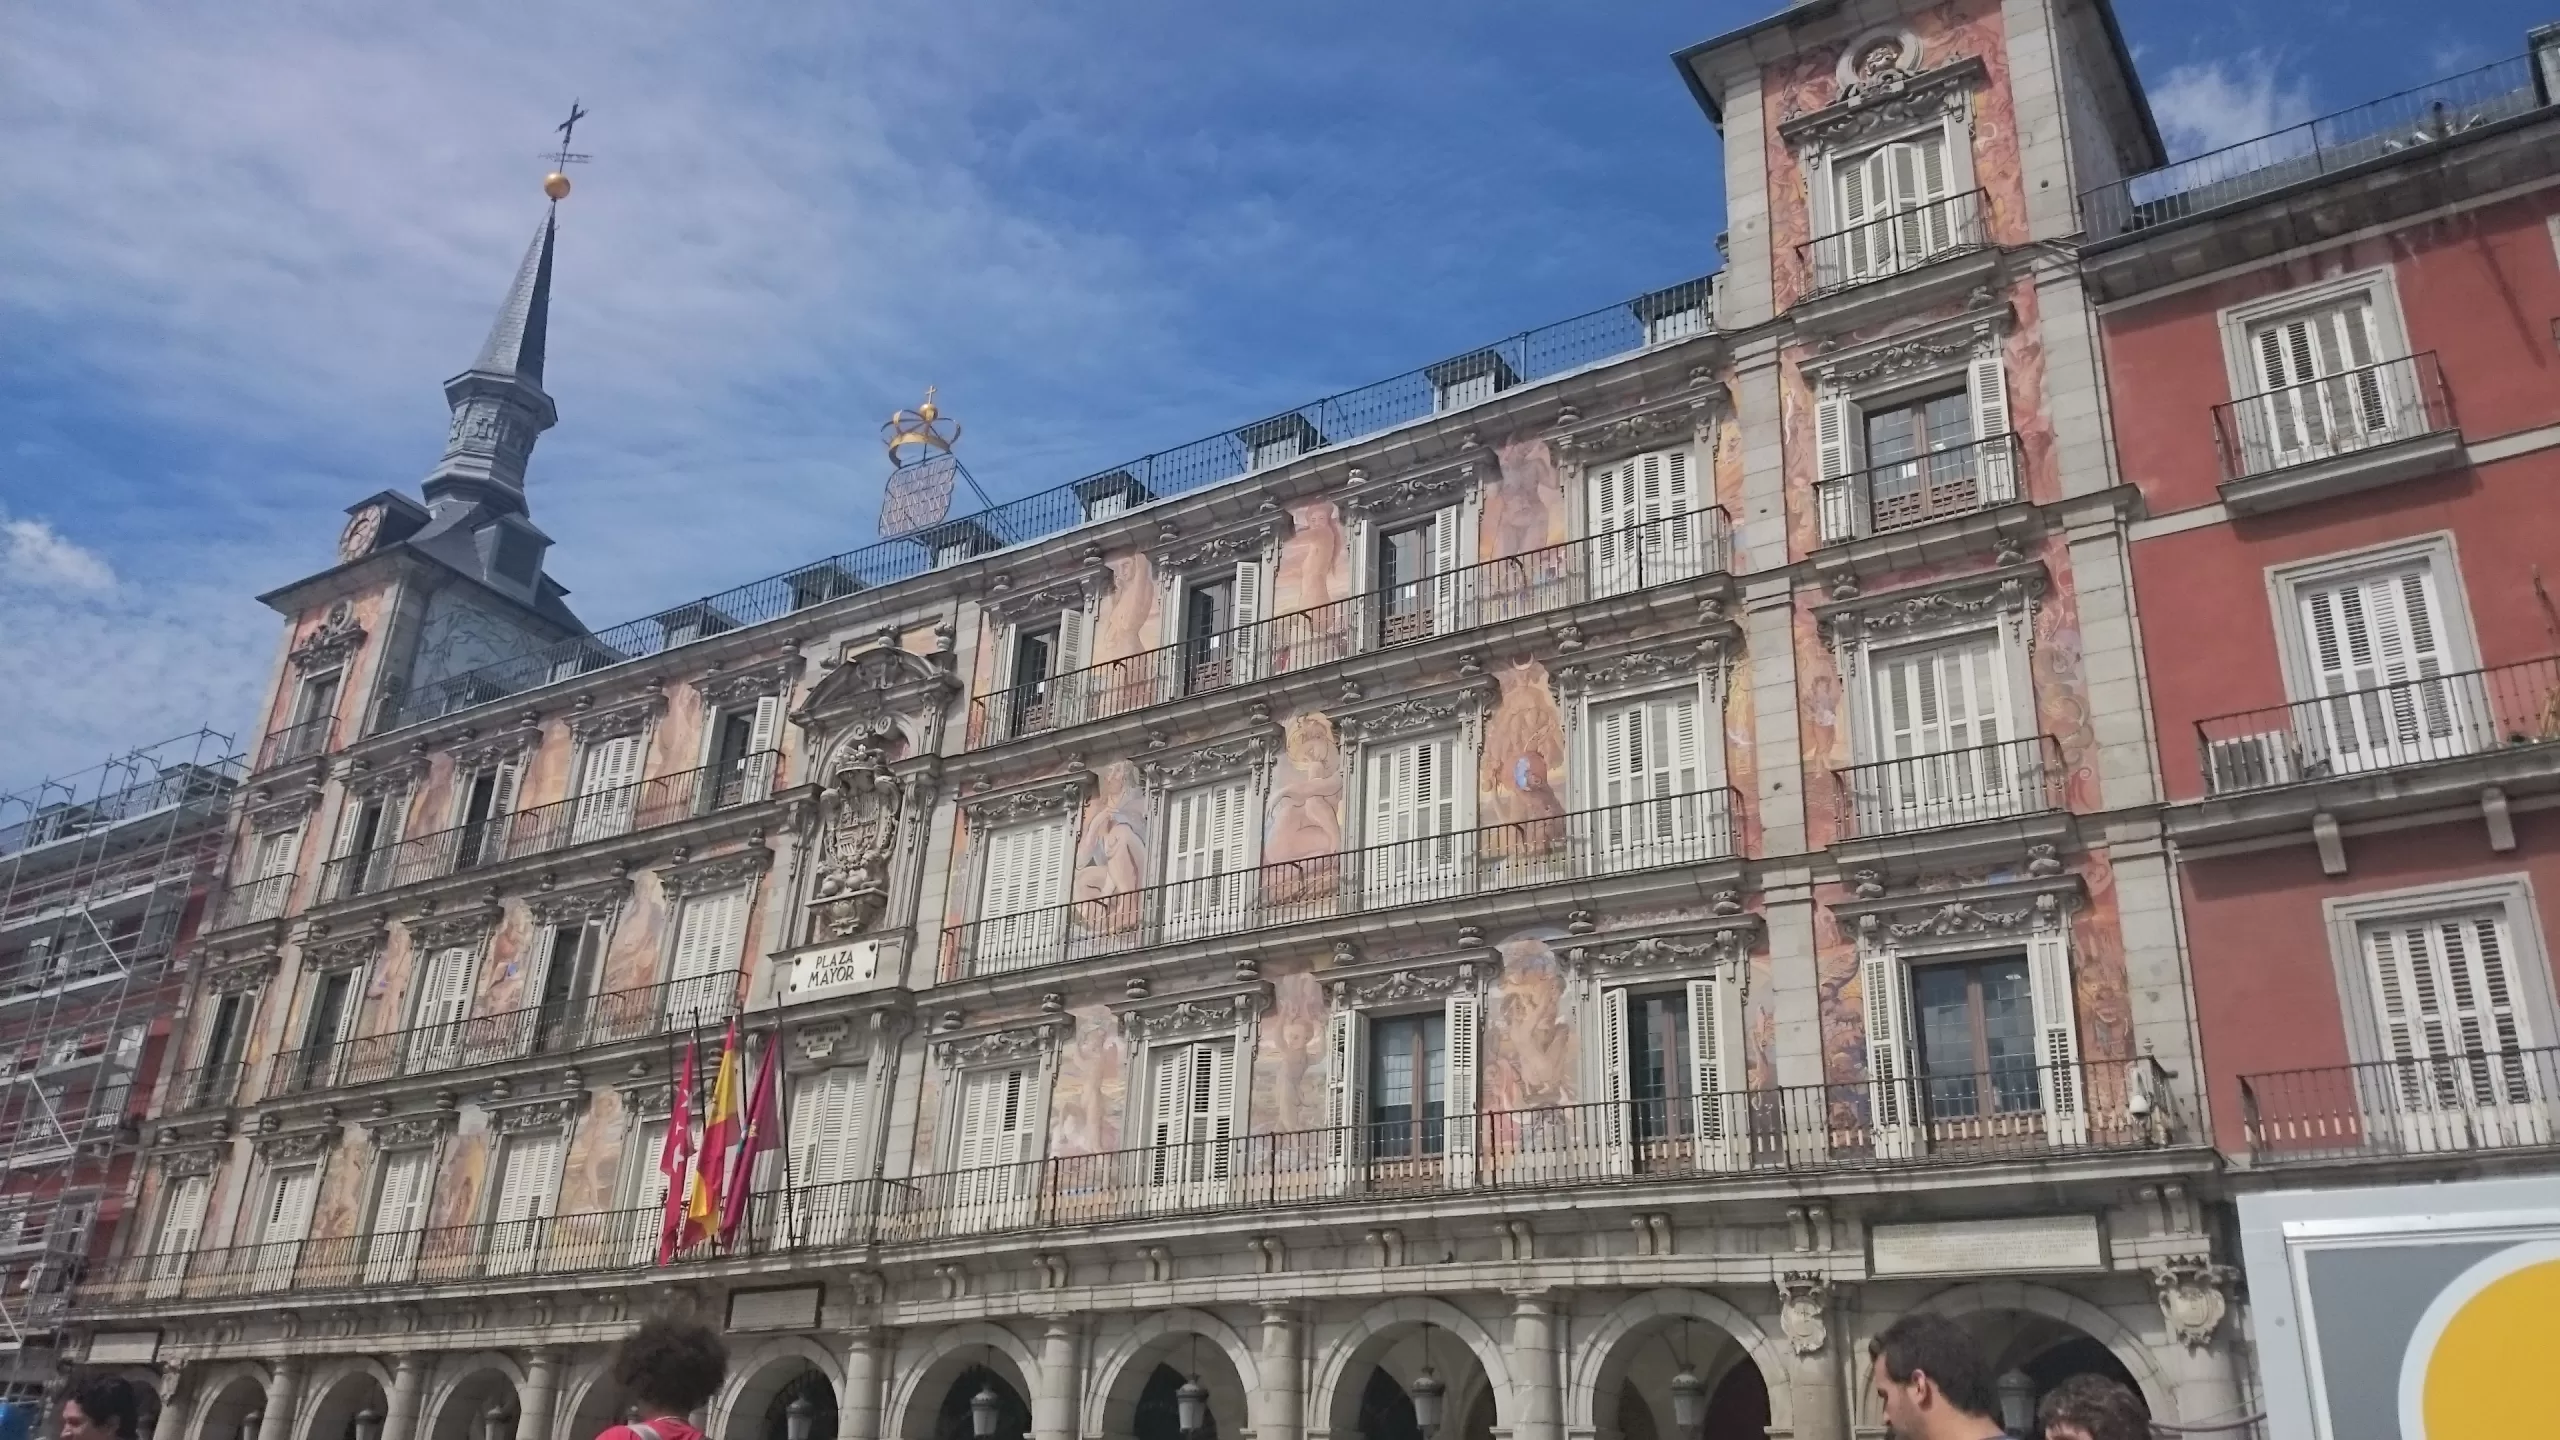 Plaza Mayor, Madrid's main square, another reason why it is better to visit than Rome in 2024.